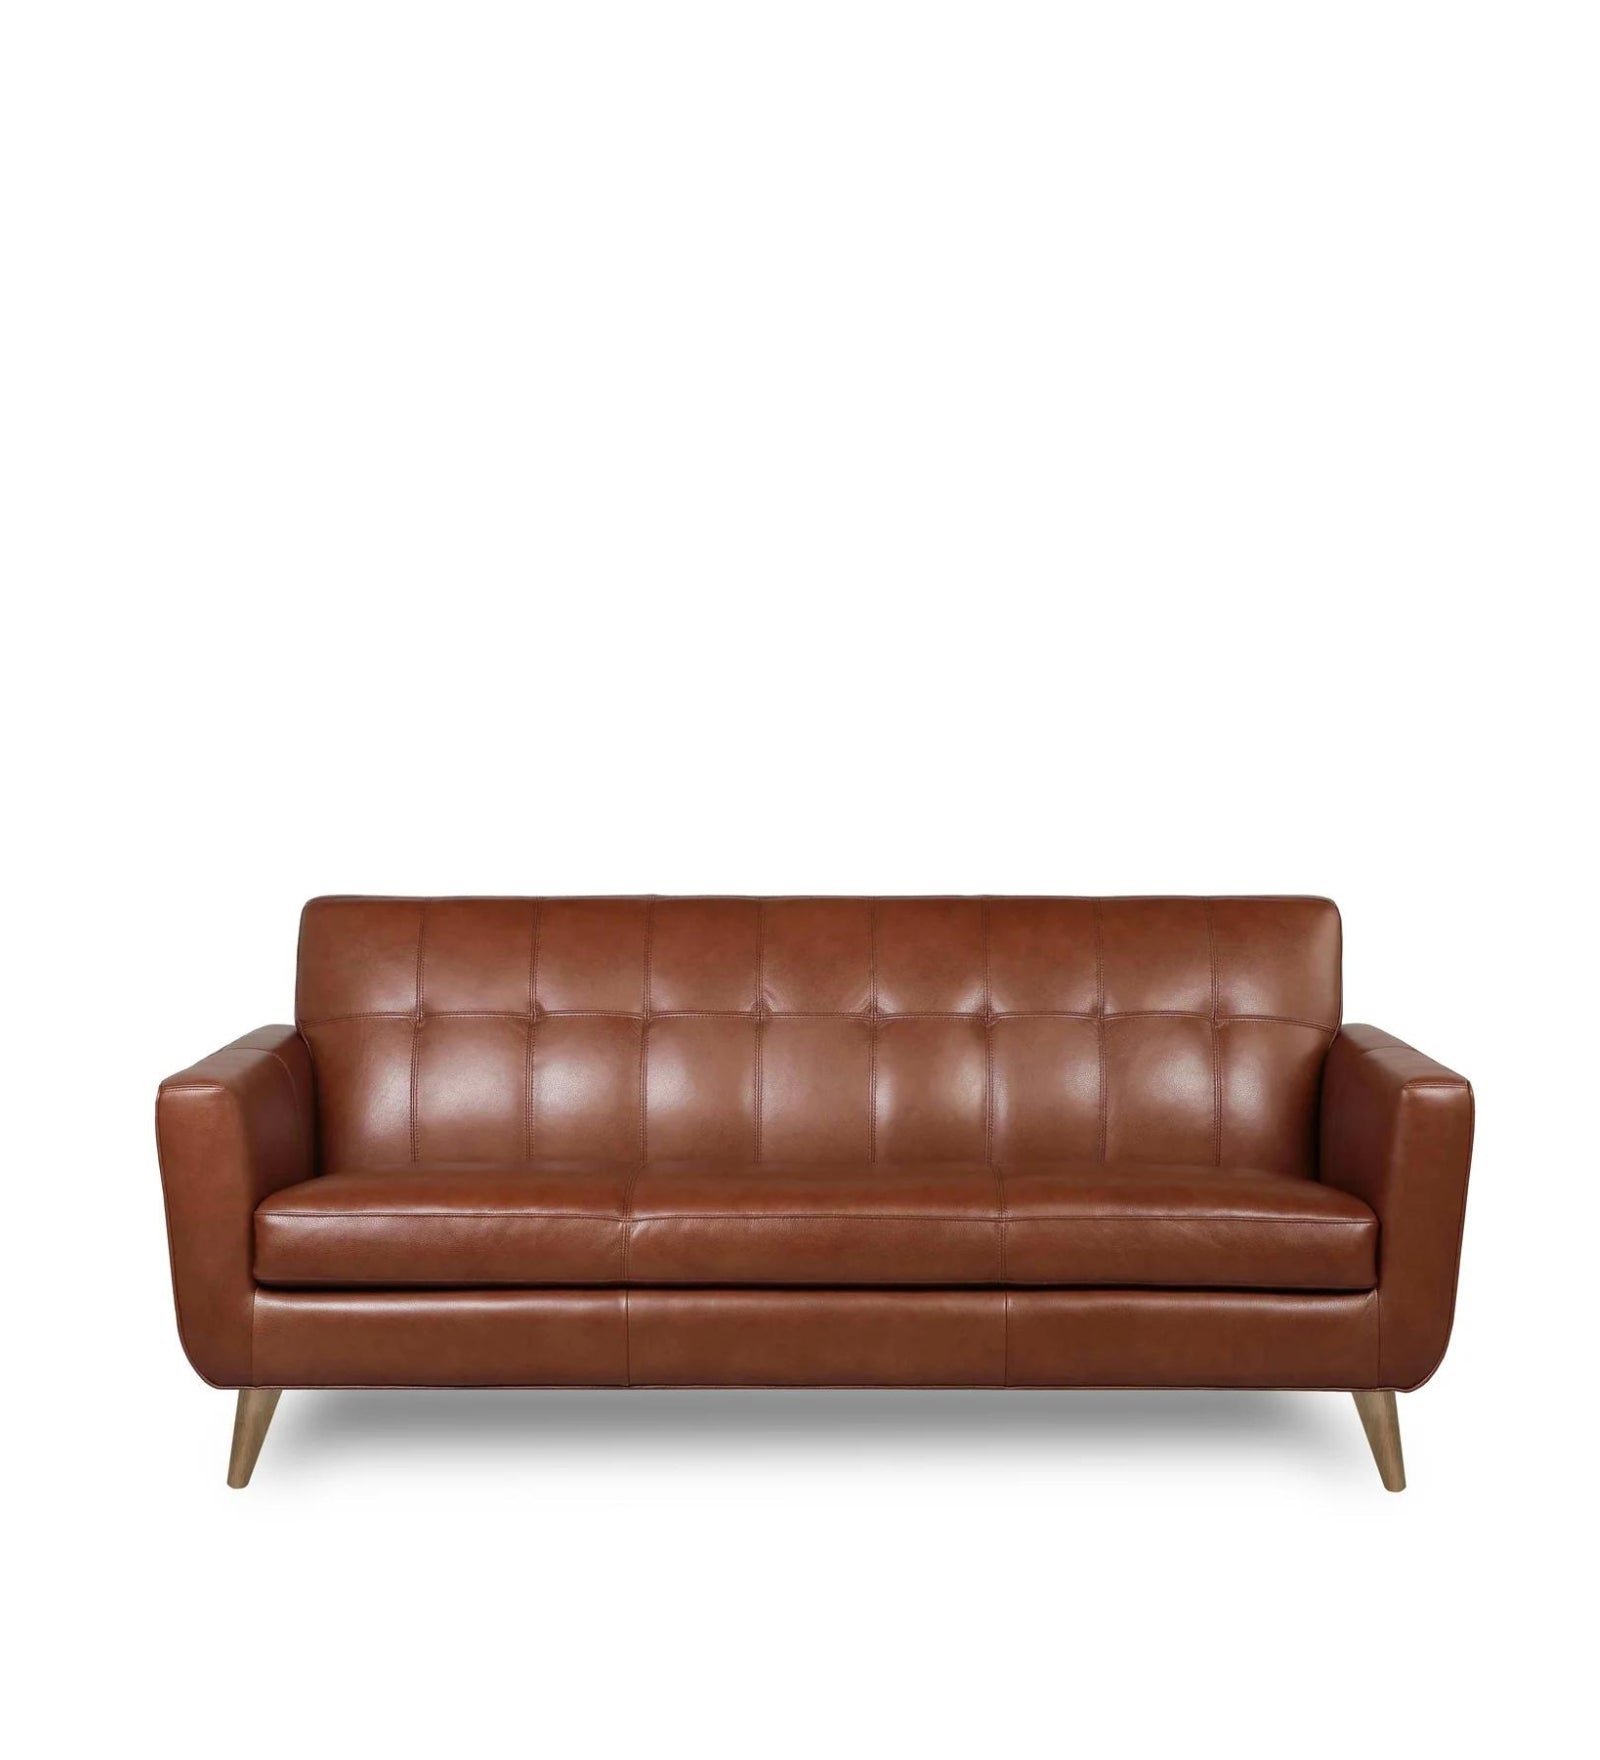 Sunny Leatherette 3 Seater Sofa in Brown Finish